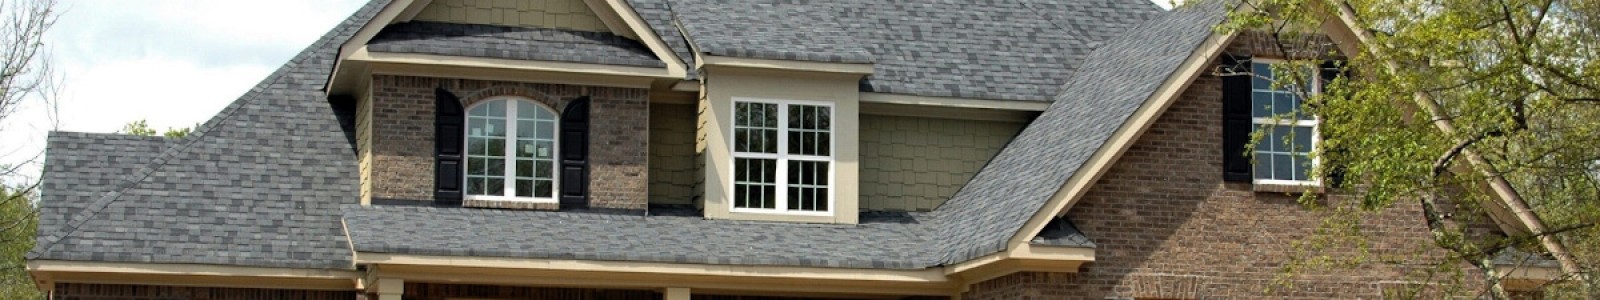 Quality Roofing Specialists and Installers installing roofs in Calgary, Airdrie, Langdon, Okotoks